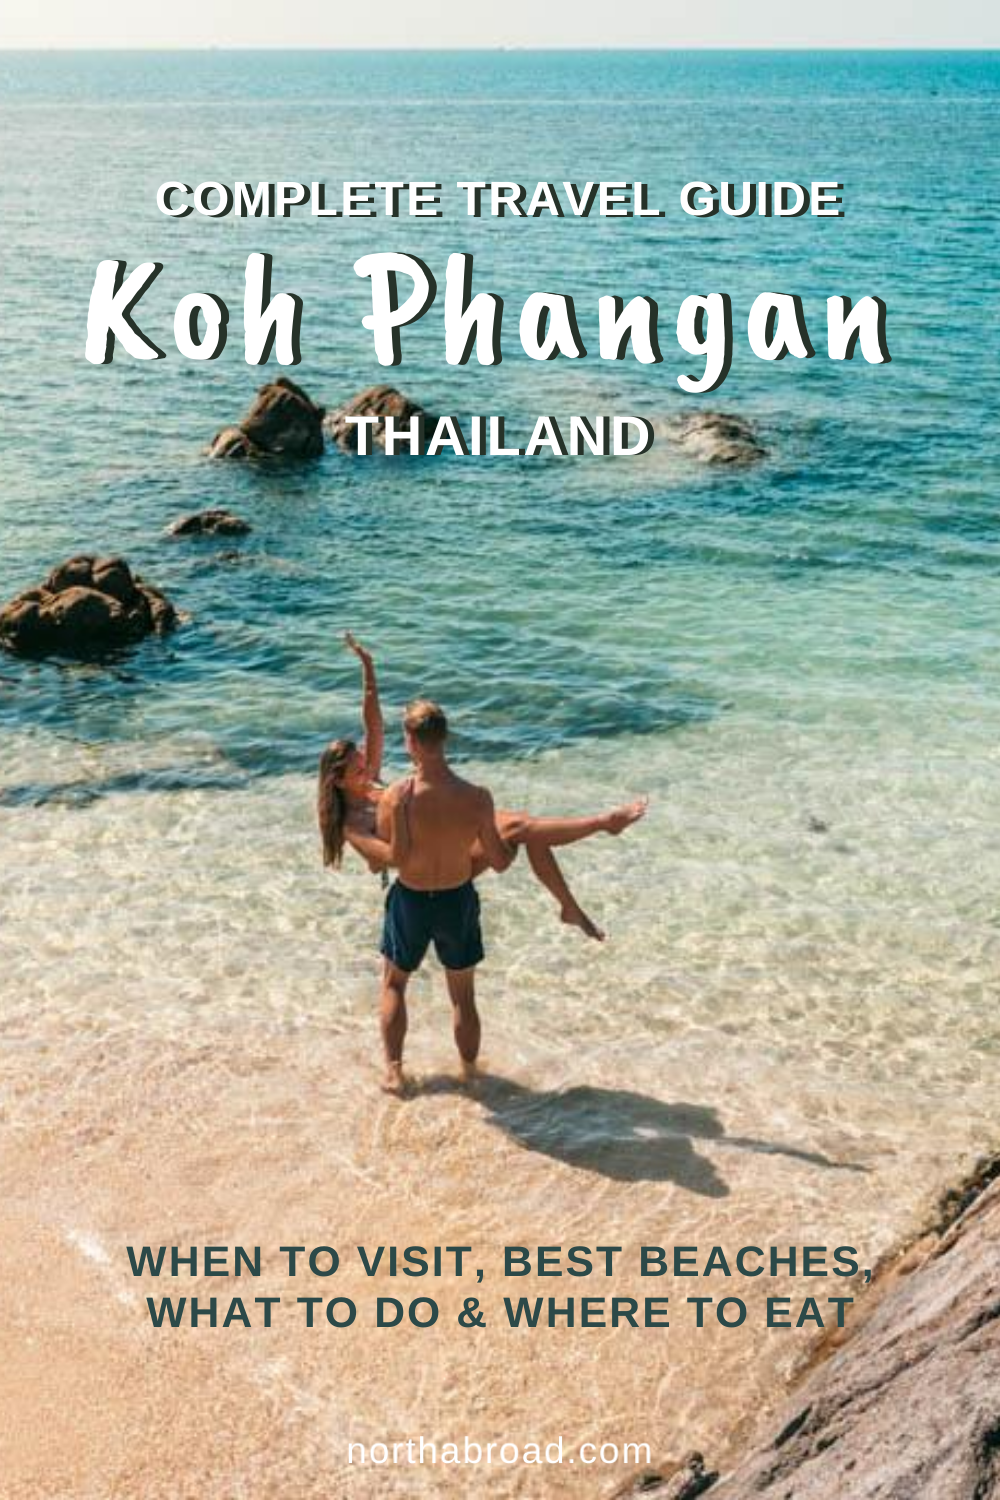 A Complete Travel Guide to Koh Phangan: Chill Out, Relax and Rejuvenate